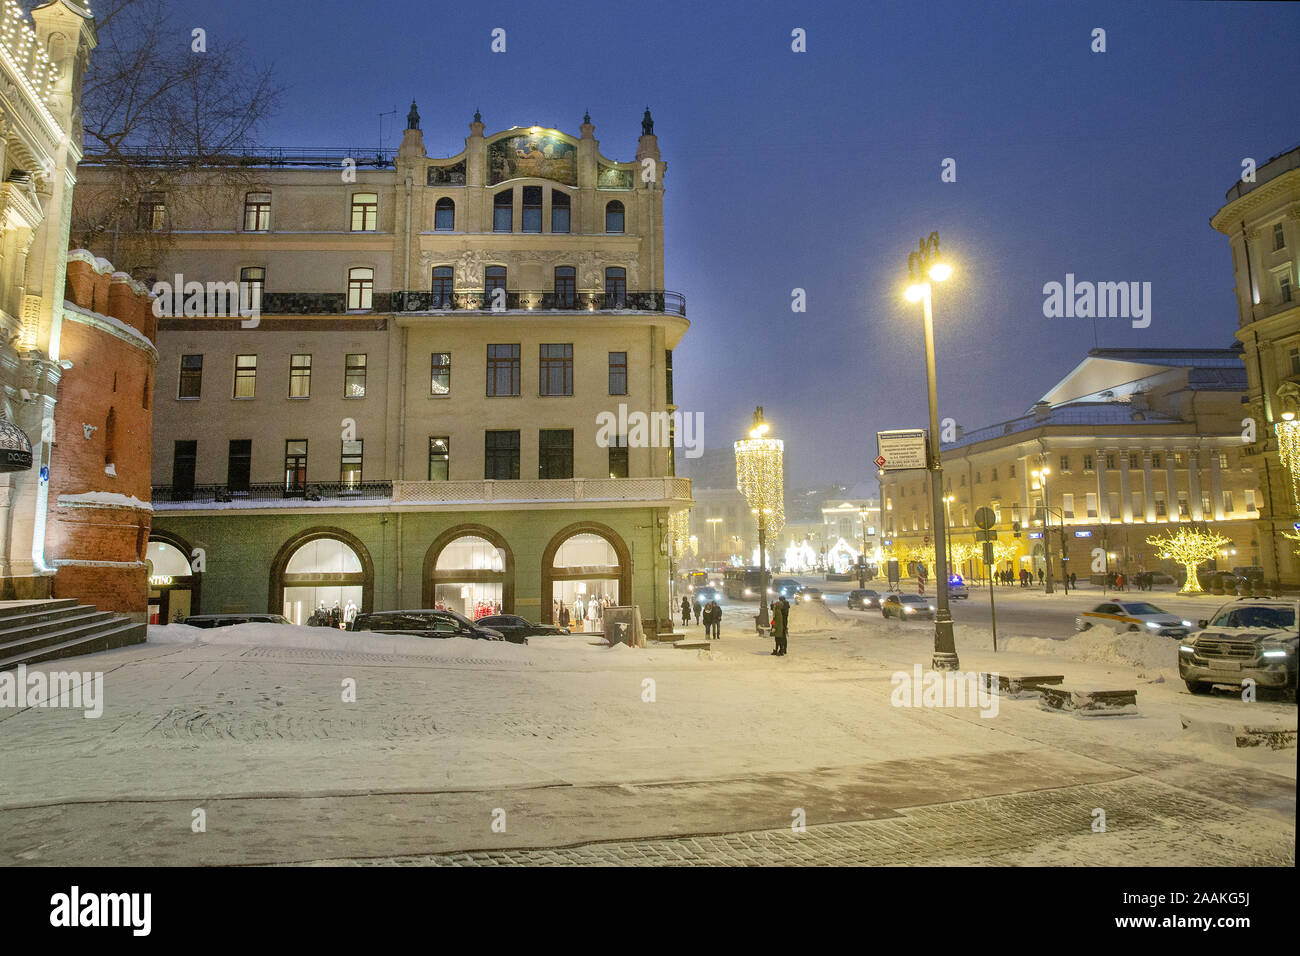 Awe Hotel Metropol  ( art Nuovo style) and other buildings  - old architecture of Moscow.  Blue  hour and snowy. Stock Photo